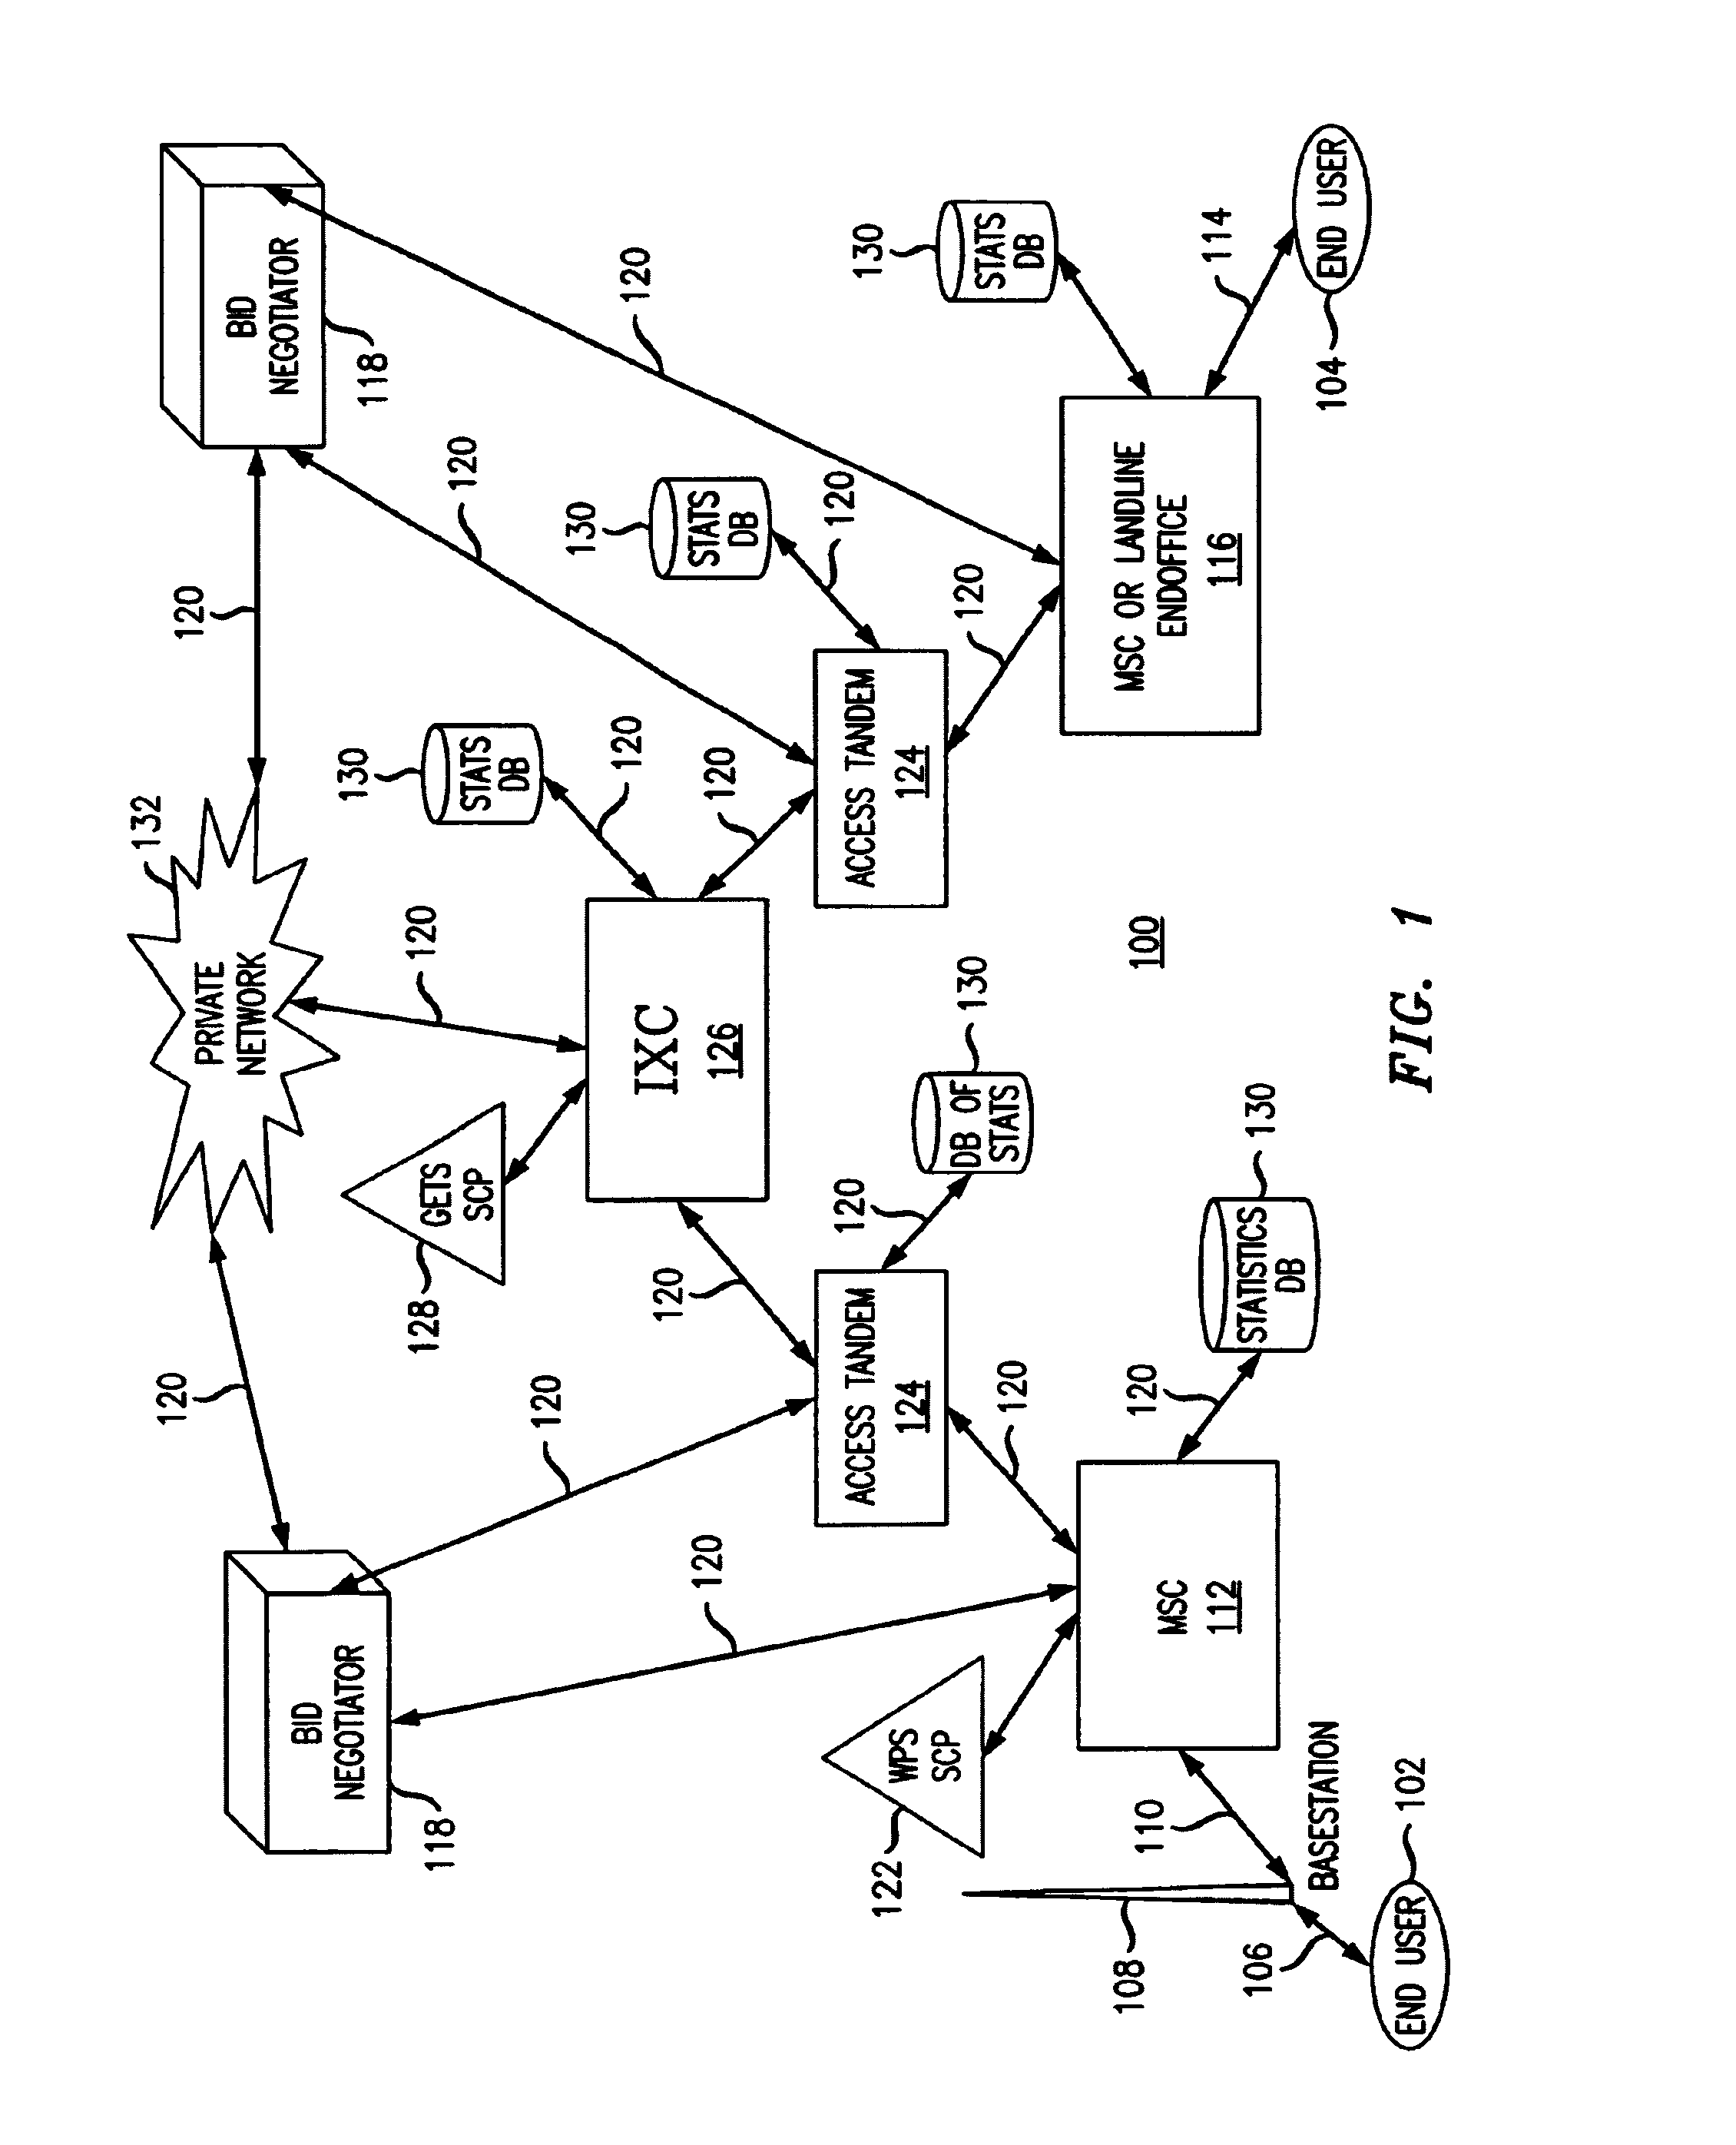 Methods for mitigating impact on non-privileged users of potential resource limitations in a communication system